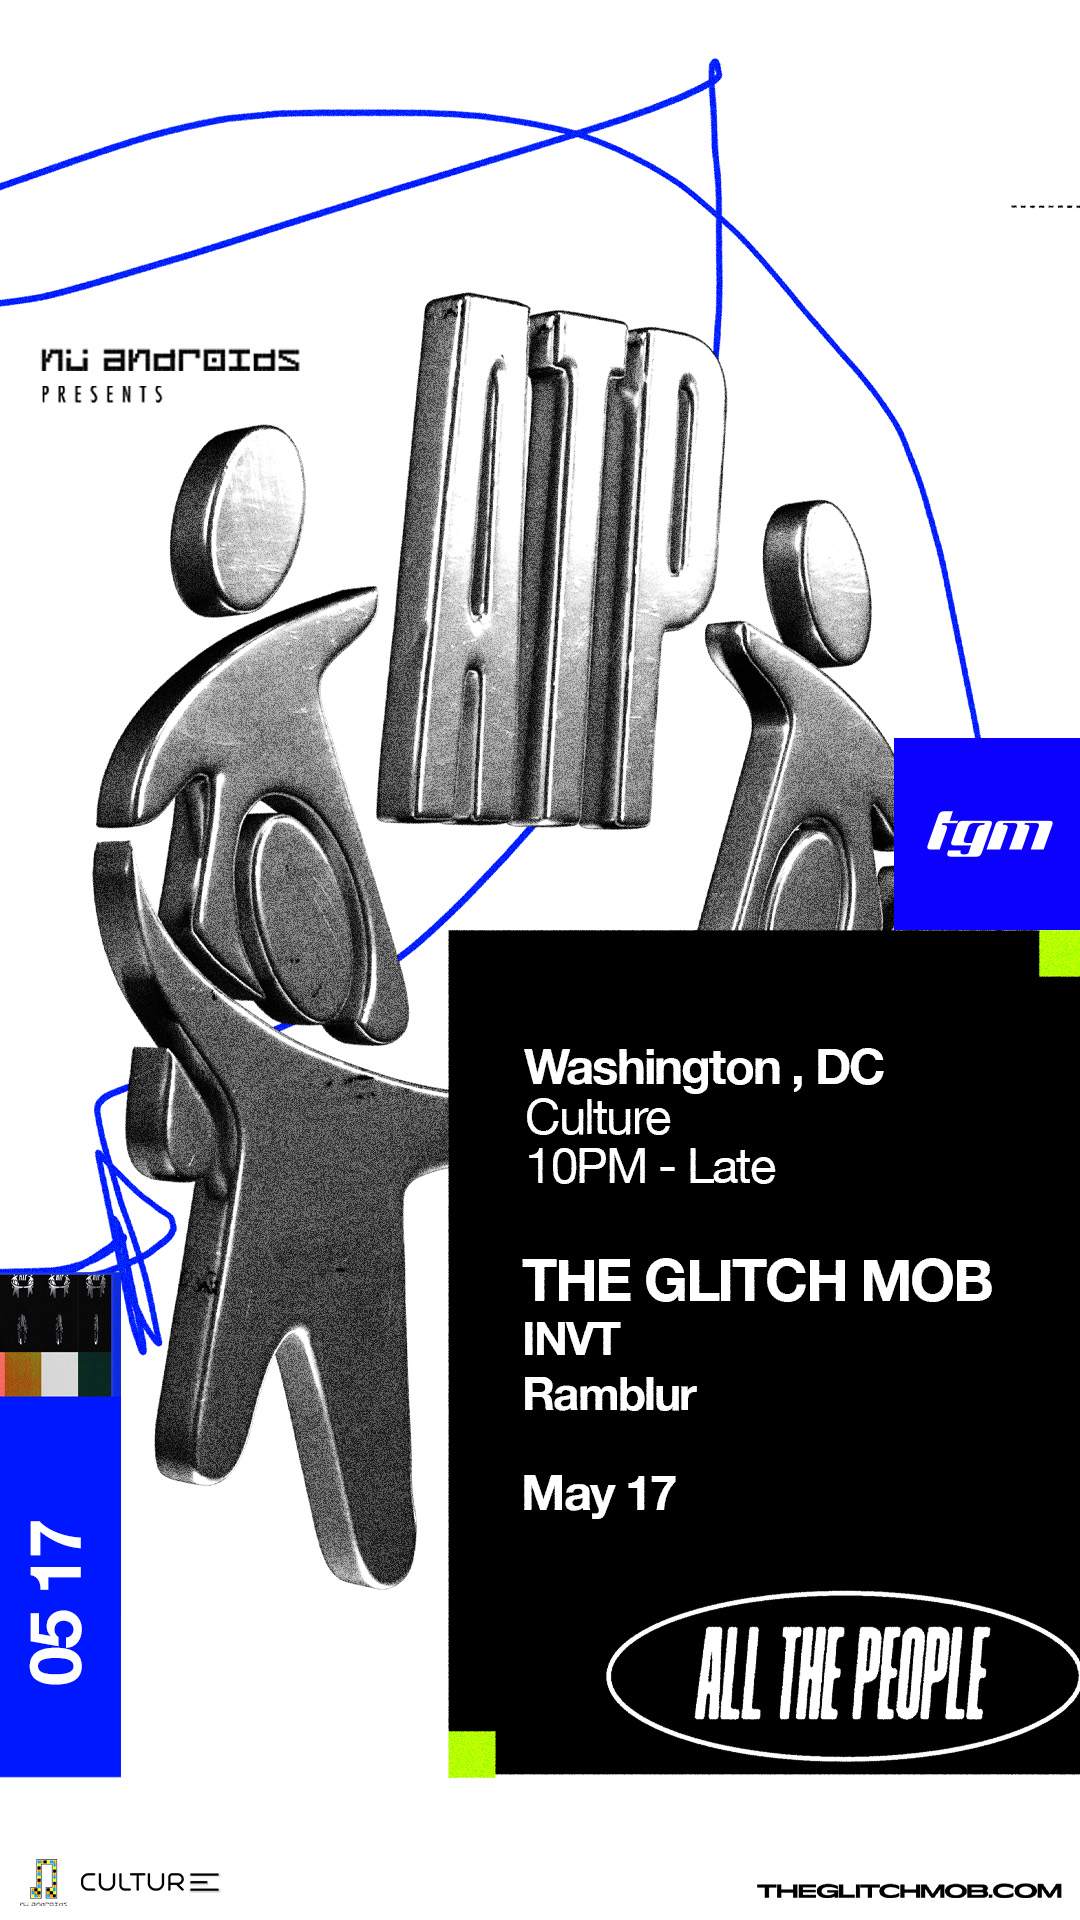 Nü Androids + All The People present: The Glitch Mob - Página frontal